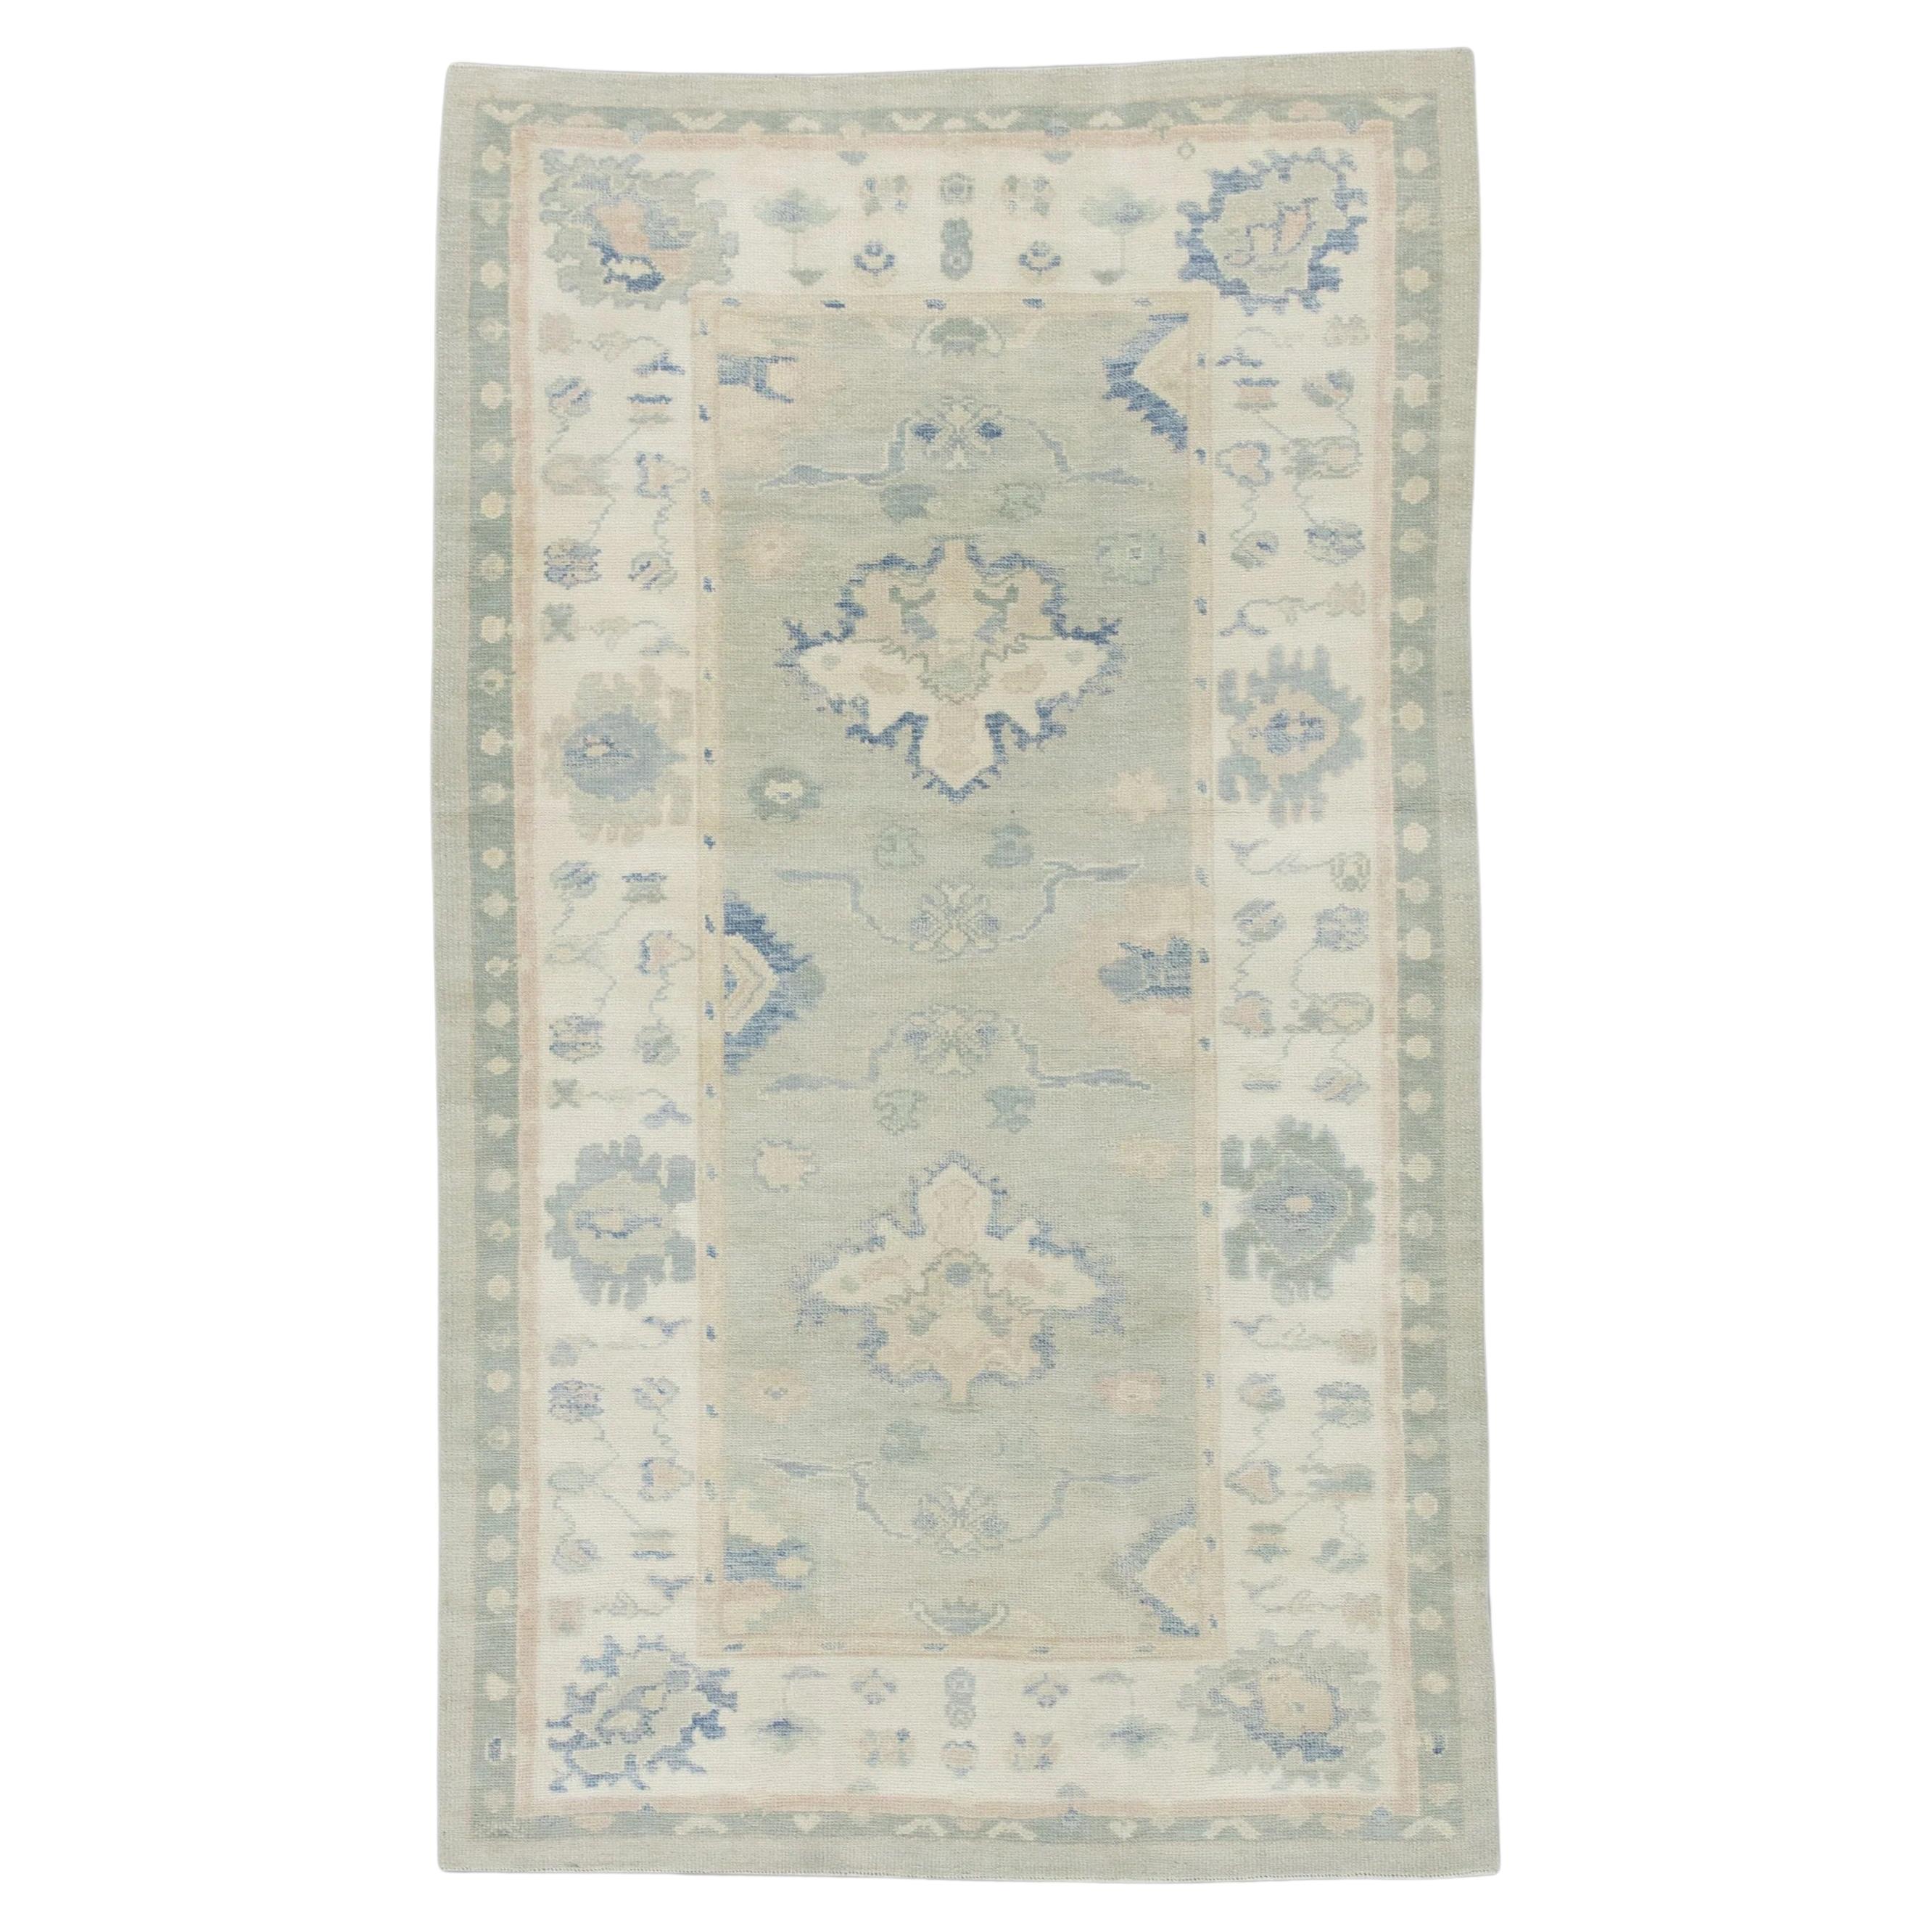 Handwoven Wool Turkish Oushak Rug in Green Floral Pattern 4'10" x 8'5"